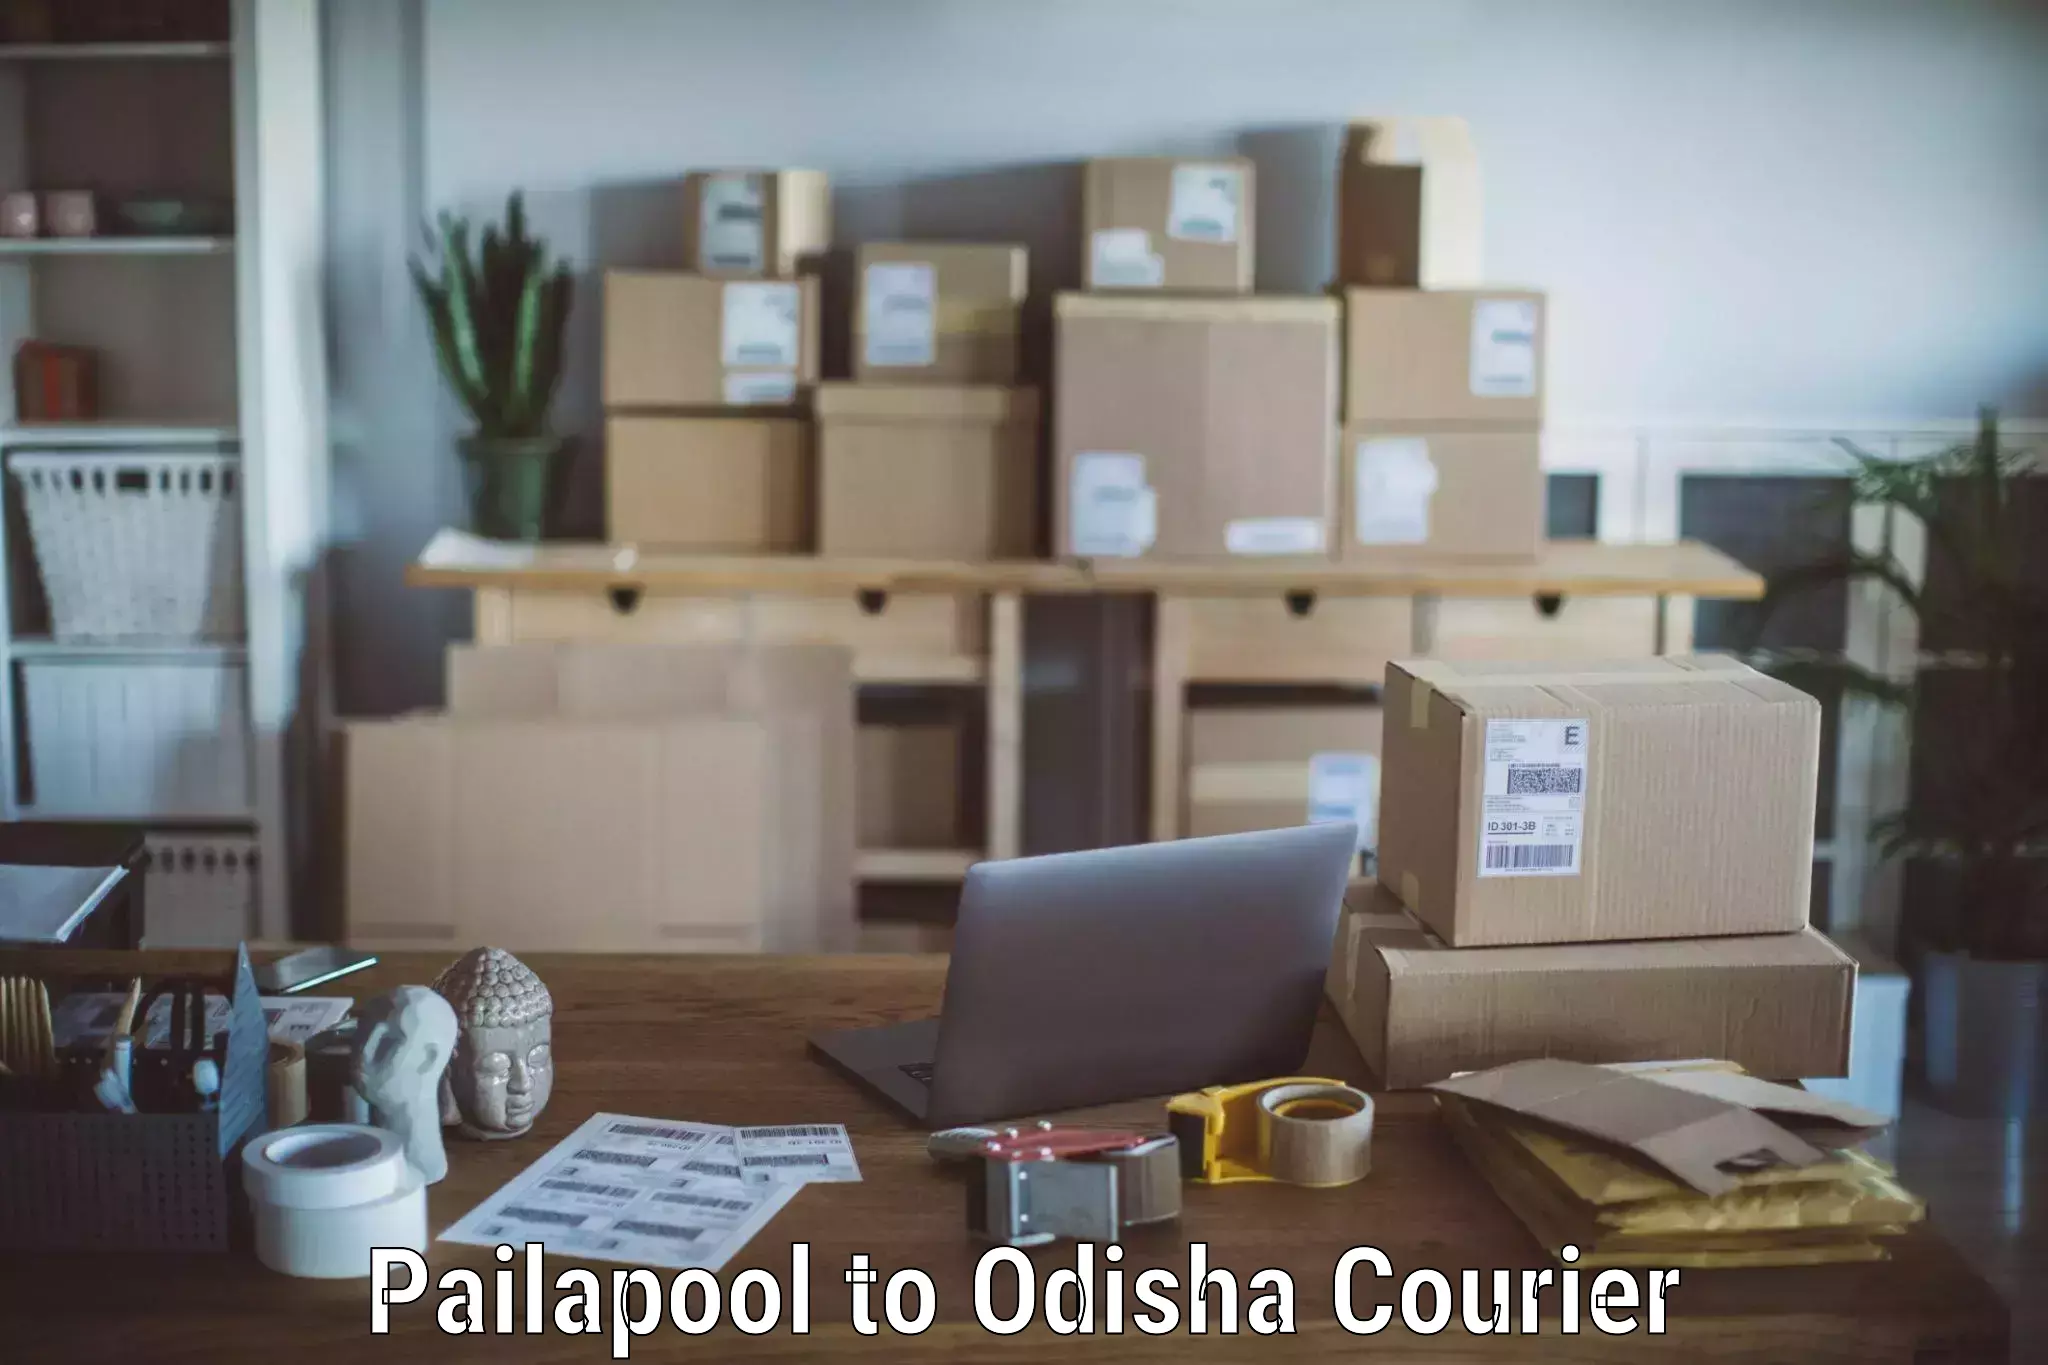 Residential moving experts Pailapool to Baliapal